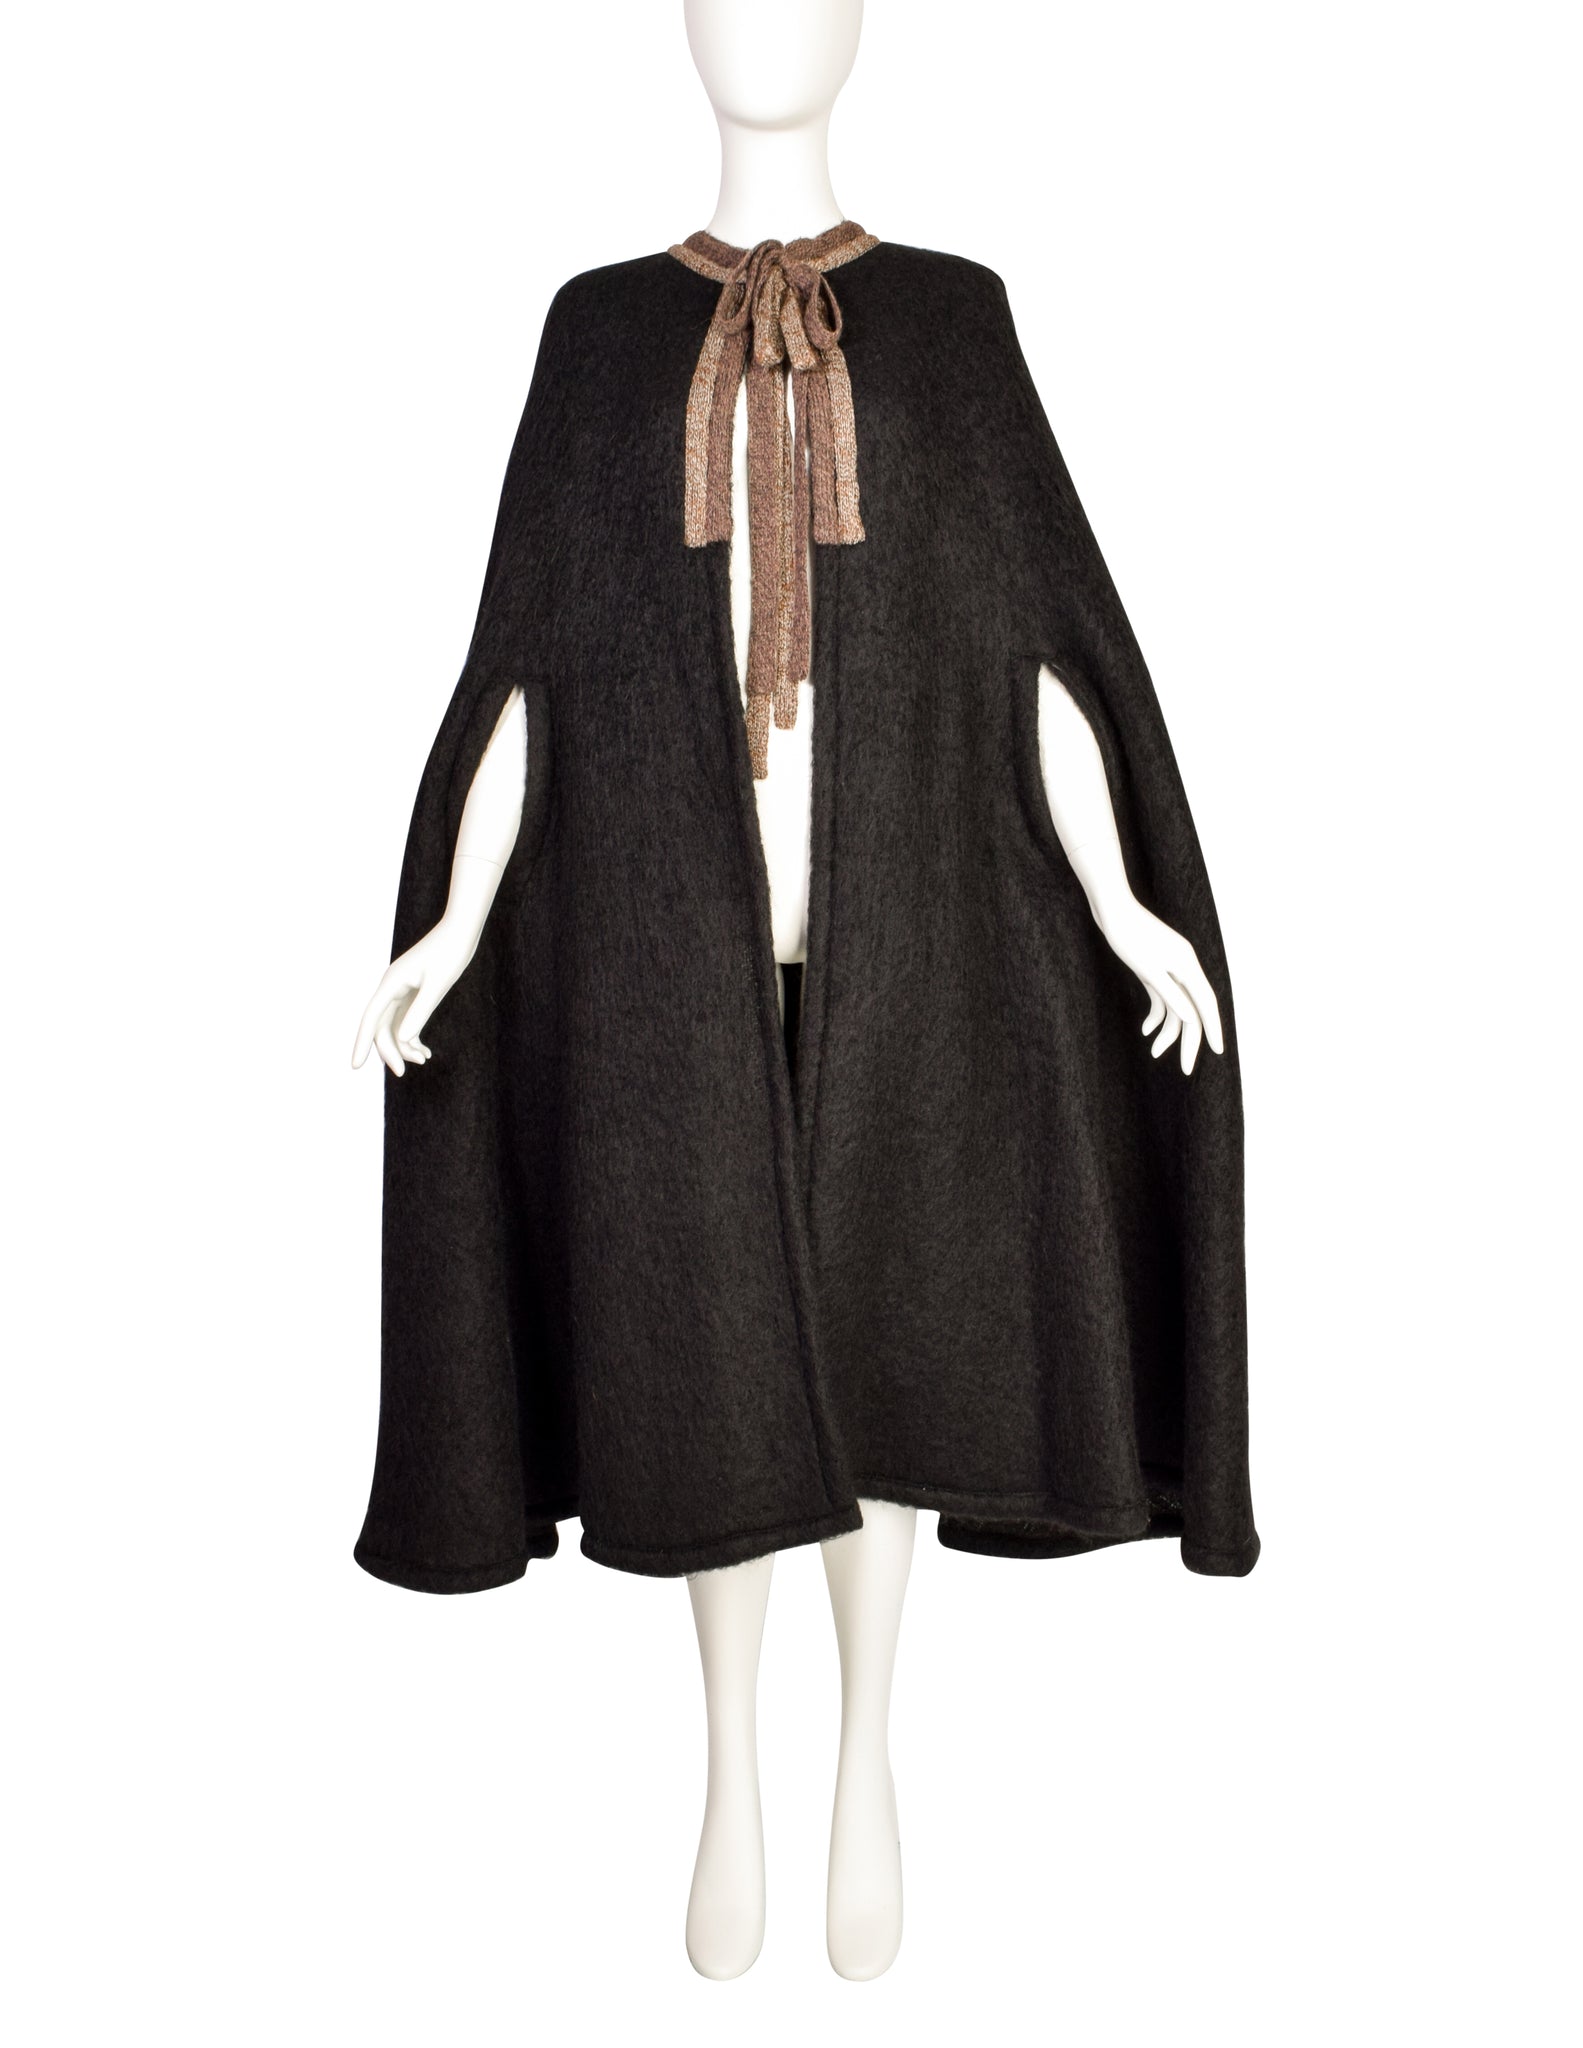 Krizia Vintage 1970s Black and Brown Mohair Wool Dramatic Cape